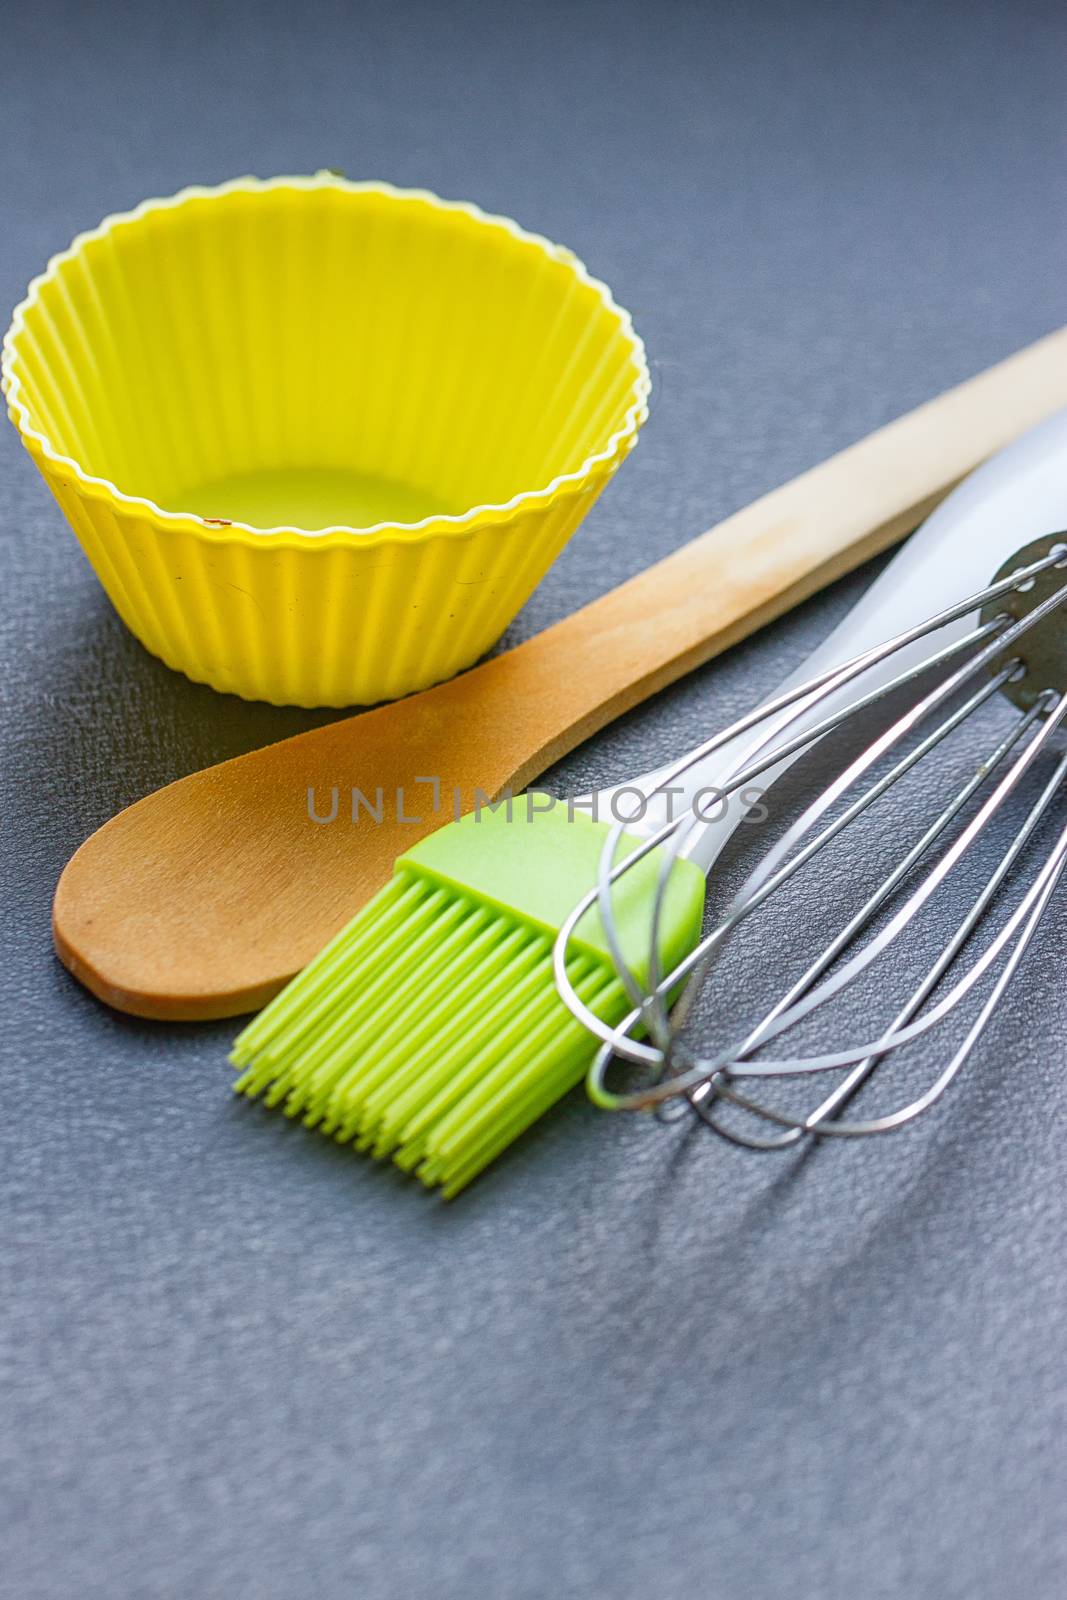 Rainbow silicone confectionery utensils on a blue background